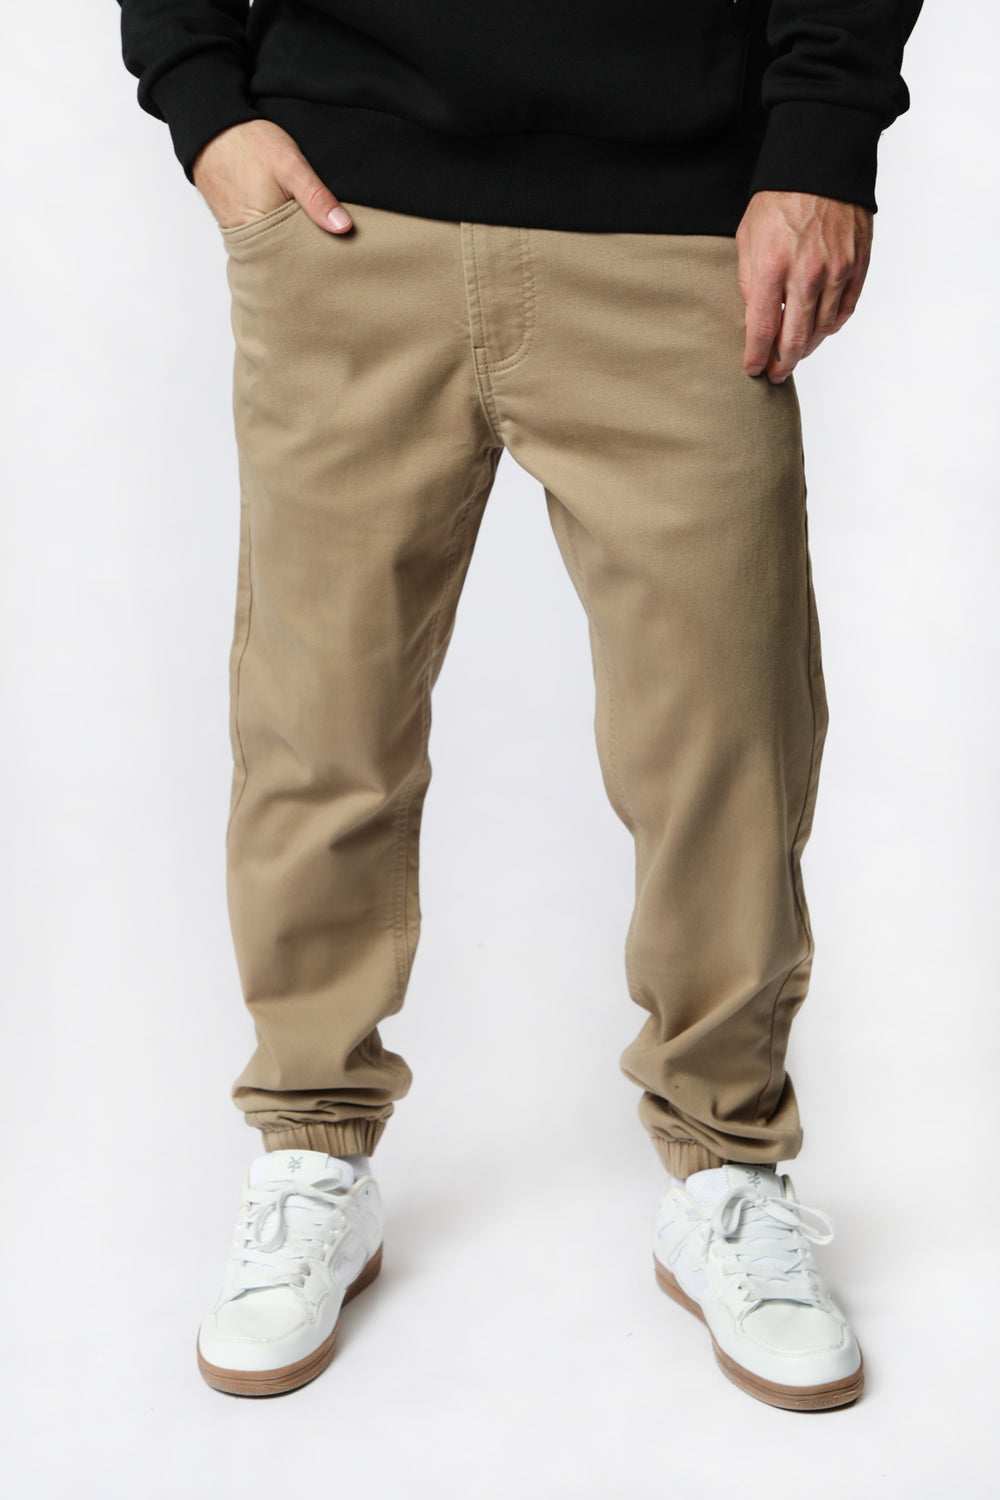 Zoo York Mens Soft Denim Relaxed Jogger Zoo York Mens Soft Denim Relaxed Jogger